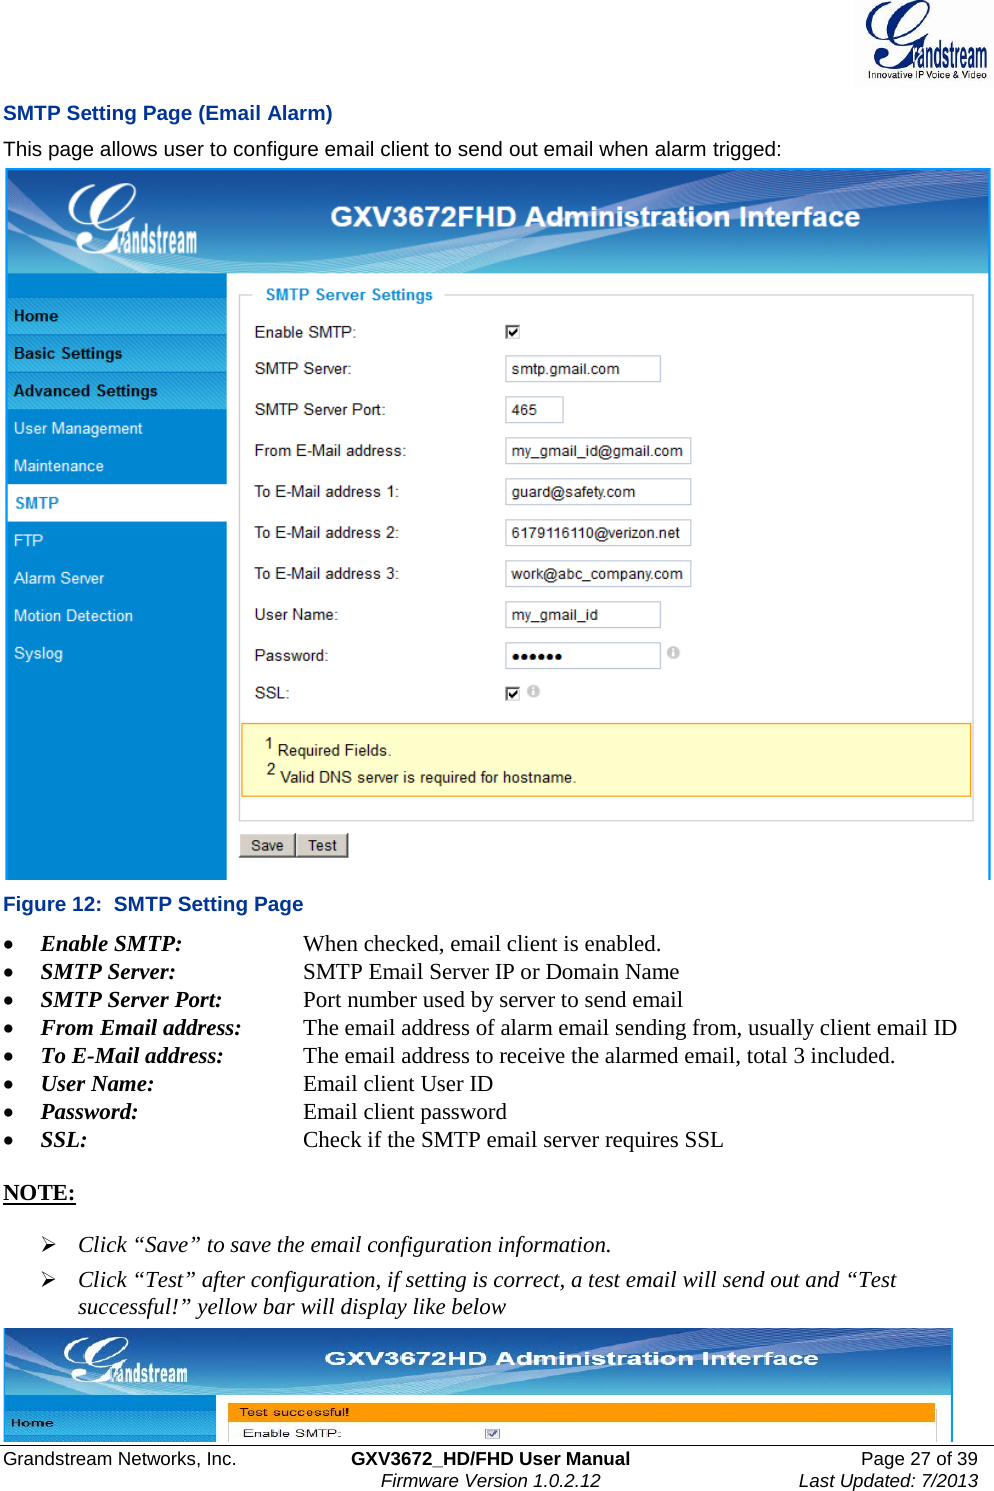  Grandstream Networks, Inc. GXV3672_HD/FHD User Manual Page 27 of 39   Firmware Version 1.0.2.12 Last Updated: 7/2013  SMTP Setting Page (Email Alarm) This page allows user to configure email client to send out email when alarm trigged:  Figure 12:  SMTP Setting Page • Enable SMTP:      When checked, email client is enabled. • SMTP Server:    SMTP Email Server IP or Domain Name • SMTP Server Port:   Port number used by server to send email • From Email address:   The email address of alarm email sending from, usually client email ID • To E-Mail address:    The email address to receive the alarmed email, total 3 included.  • User Name:     Email client User ID • Password:      Email client password • SSL:   Check if the SMTP email server requires SSL   NOTE:    Click “Save” to save the email configuration information.  Click “Test” after configuration, if setting is correct, a test email will send out and “Test successful!” yellow bar will display like below   